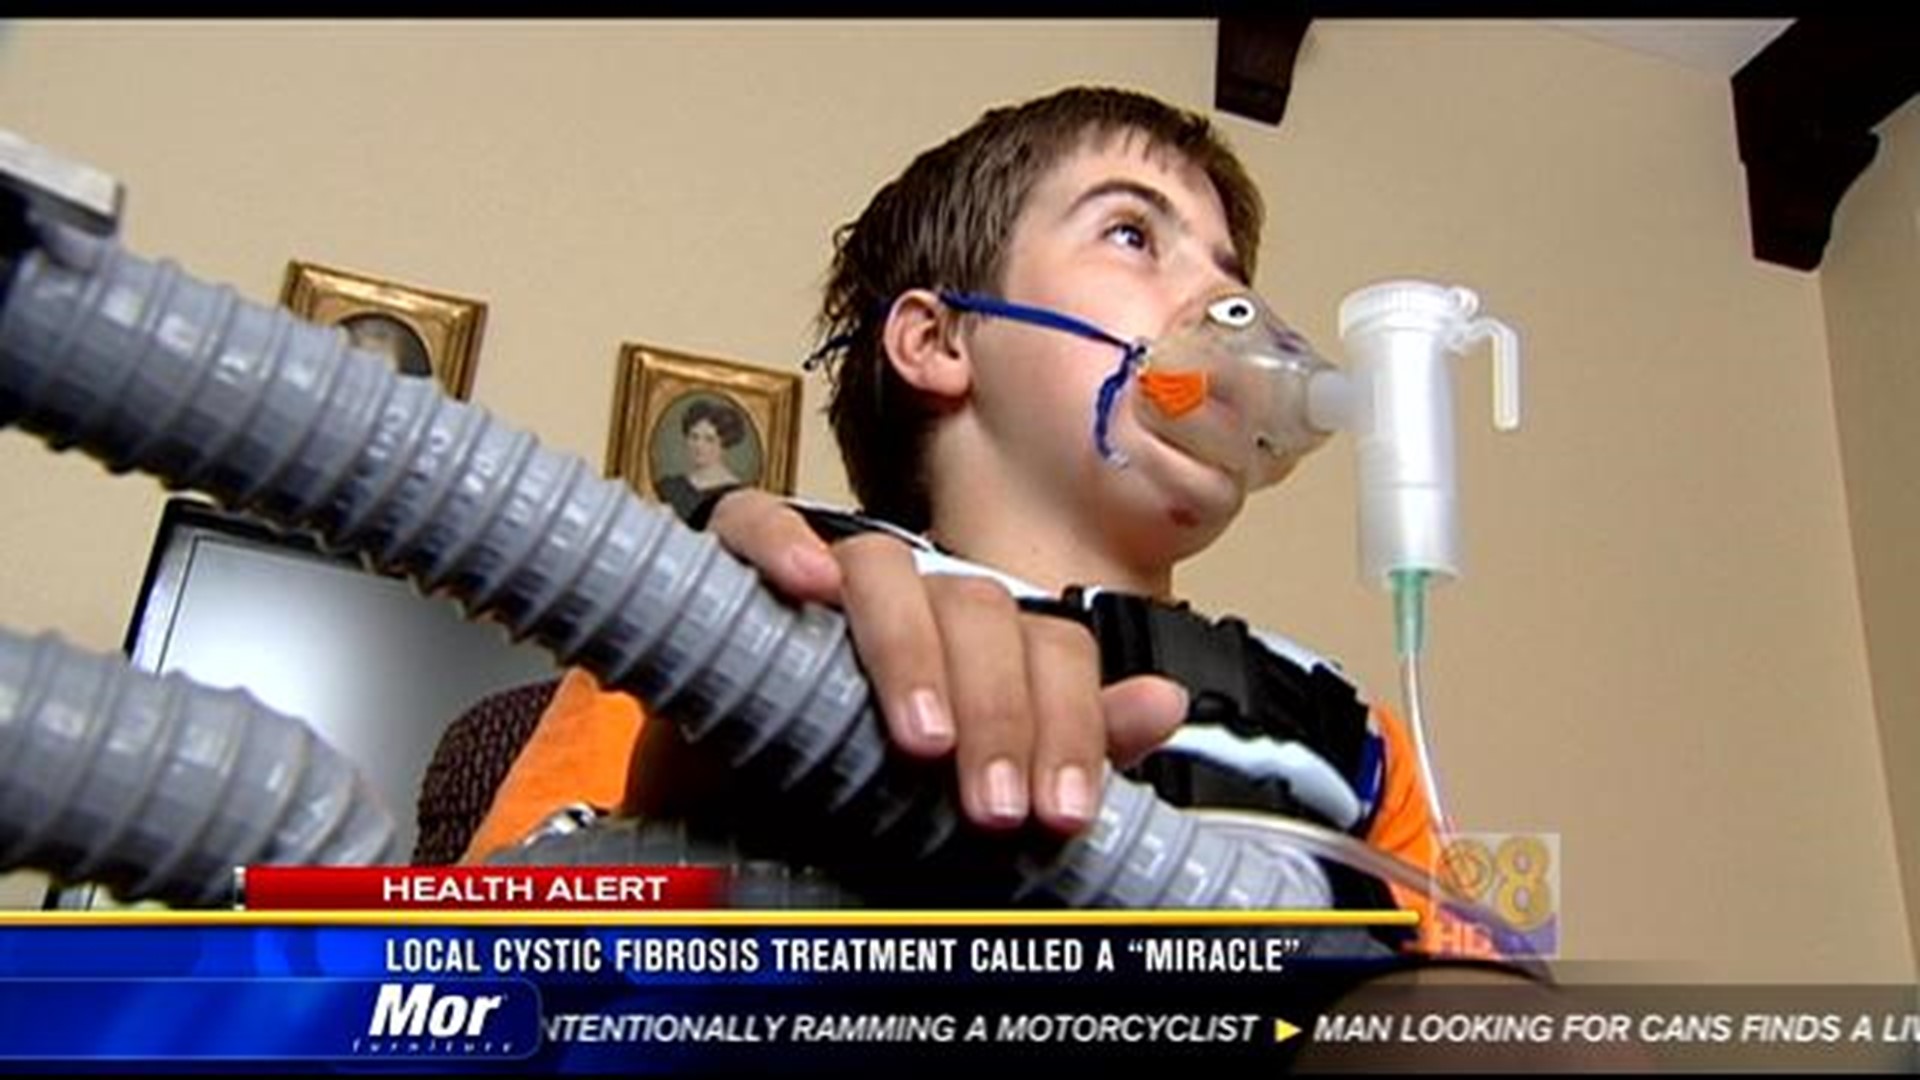 It's the closest scientists have come to a cure for cystic fibrosis and it was discovered in San Diego in 2013.